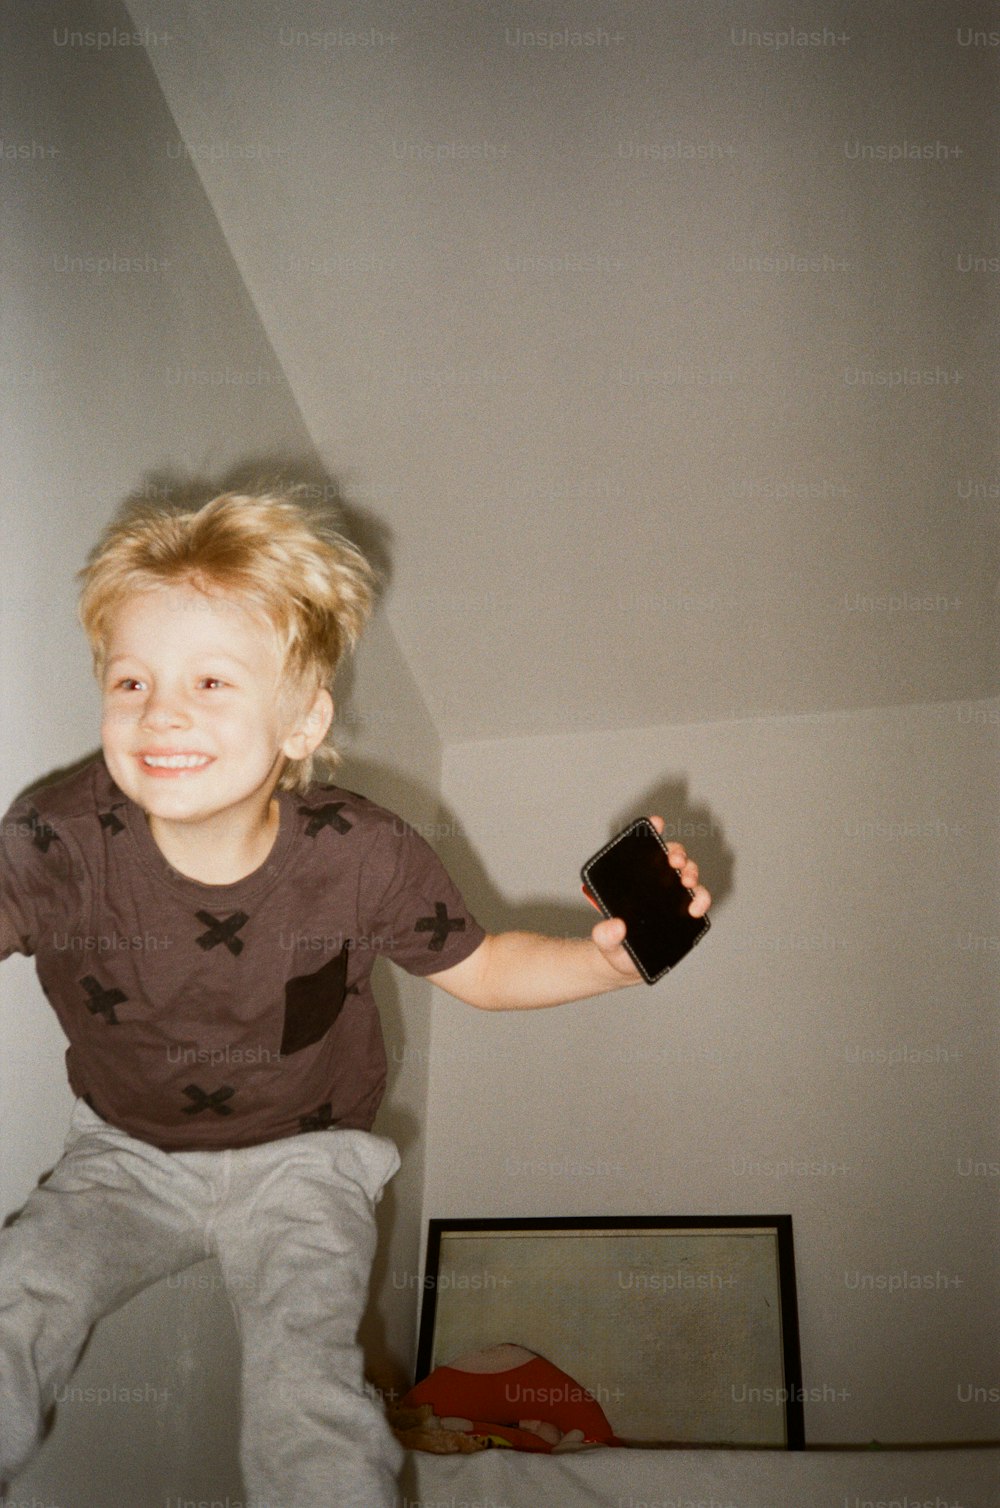 a young boy holding a remote control in his hand